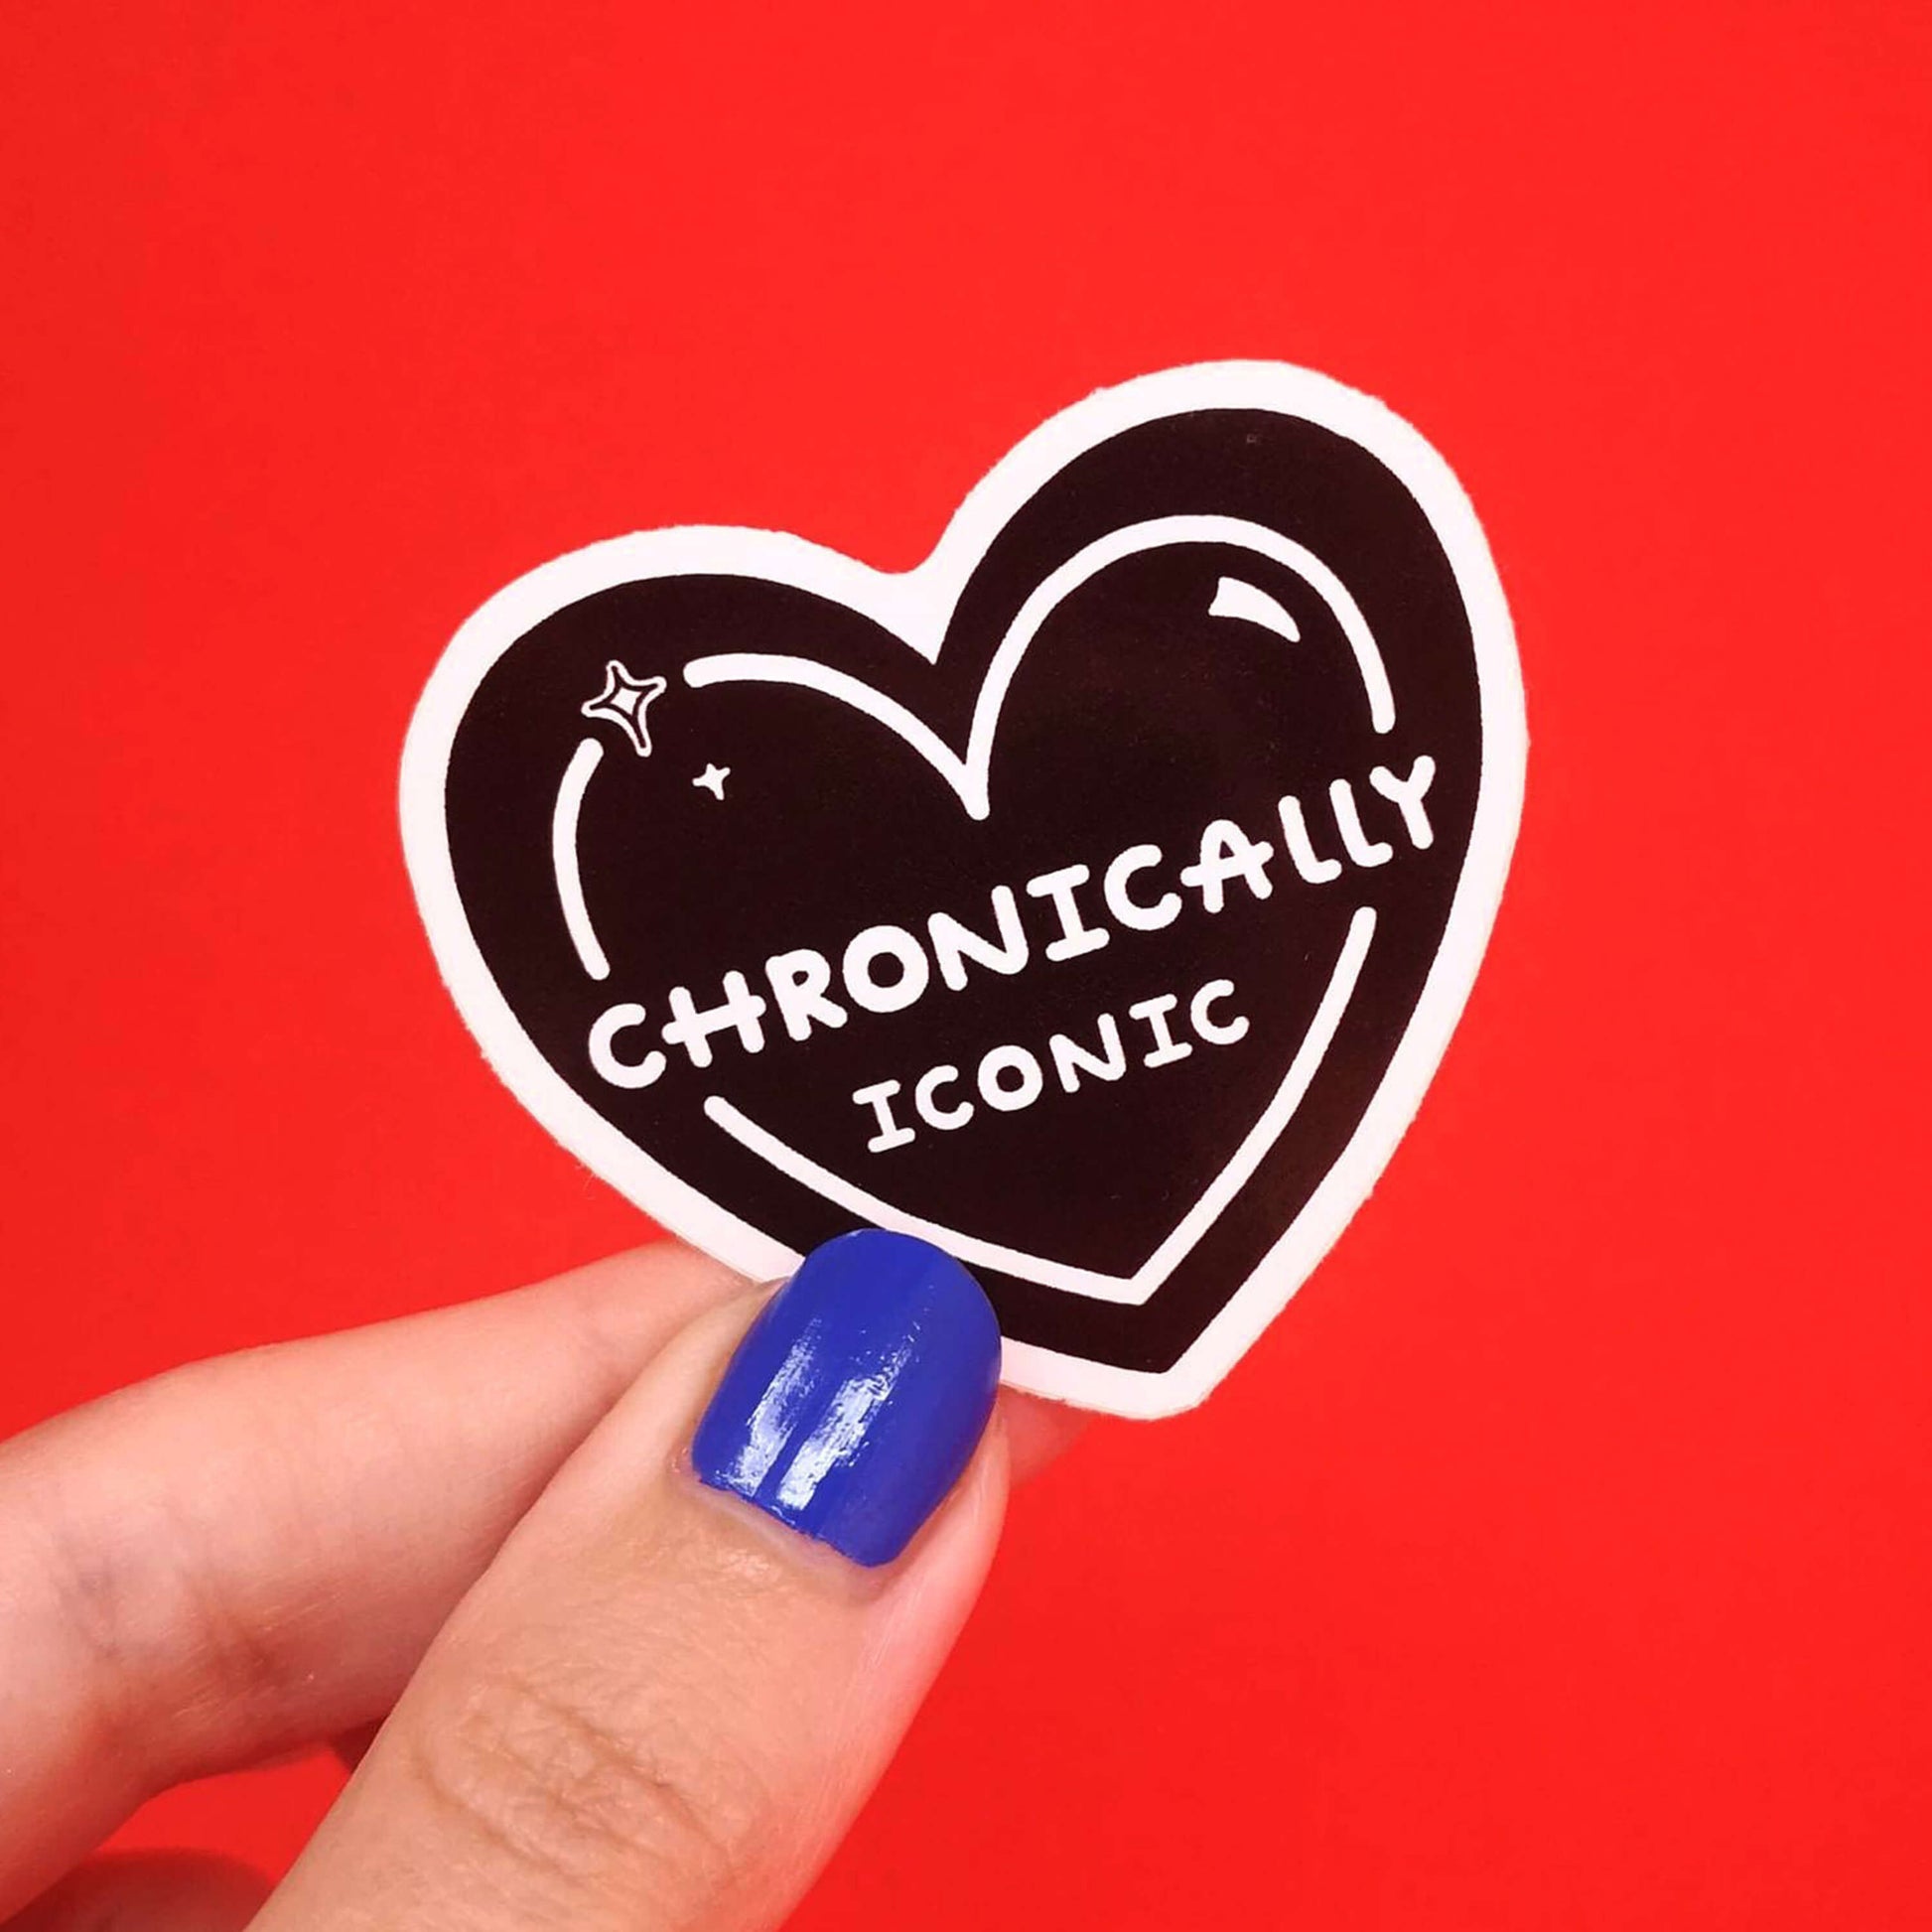 The Chronically Iconic Sticker being held over a red background by a hand with blue nail varnish. The black heart shaped sticker has a white outline with sparkles and centre text reading 'chronically iconic'. The design is raising awareness for chronic illness and invisible illness.